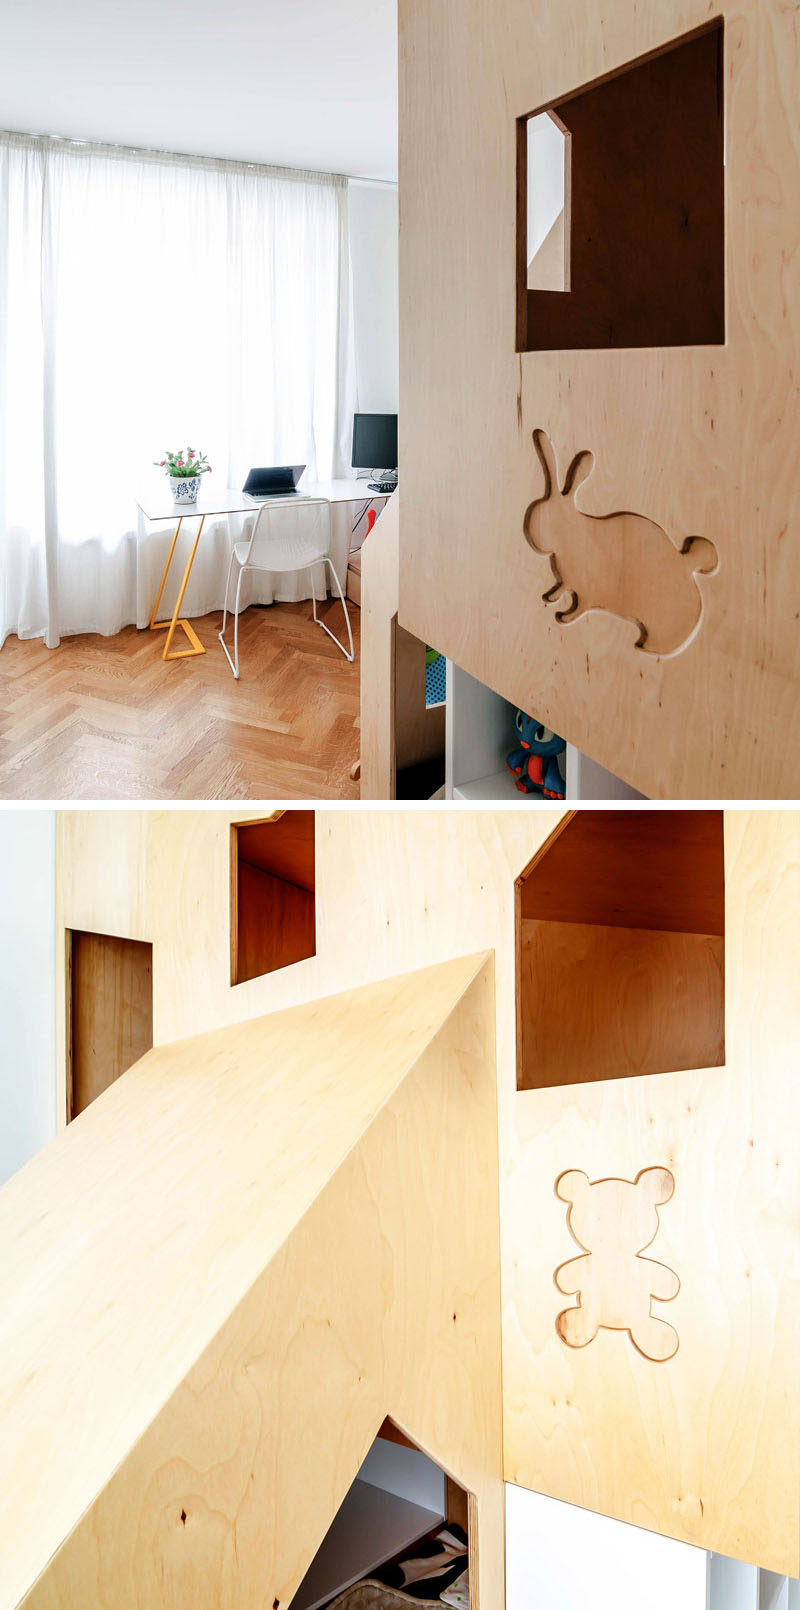 This custom modern plywood bunk bed design in a small kids bedroom houses two beds, a small bookshelf and features multiple wooden cutouts to create windows that allow light into the sleeping space and allows the little kids to look out from the comfort of their beds.